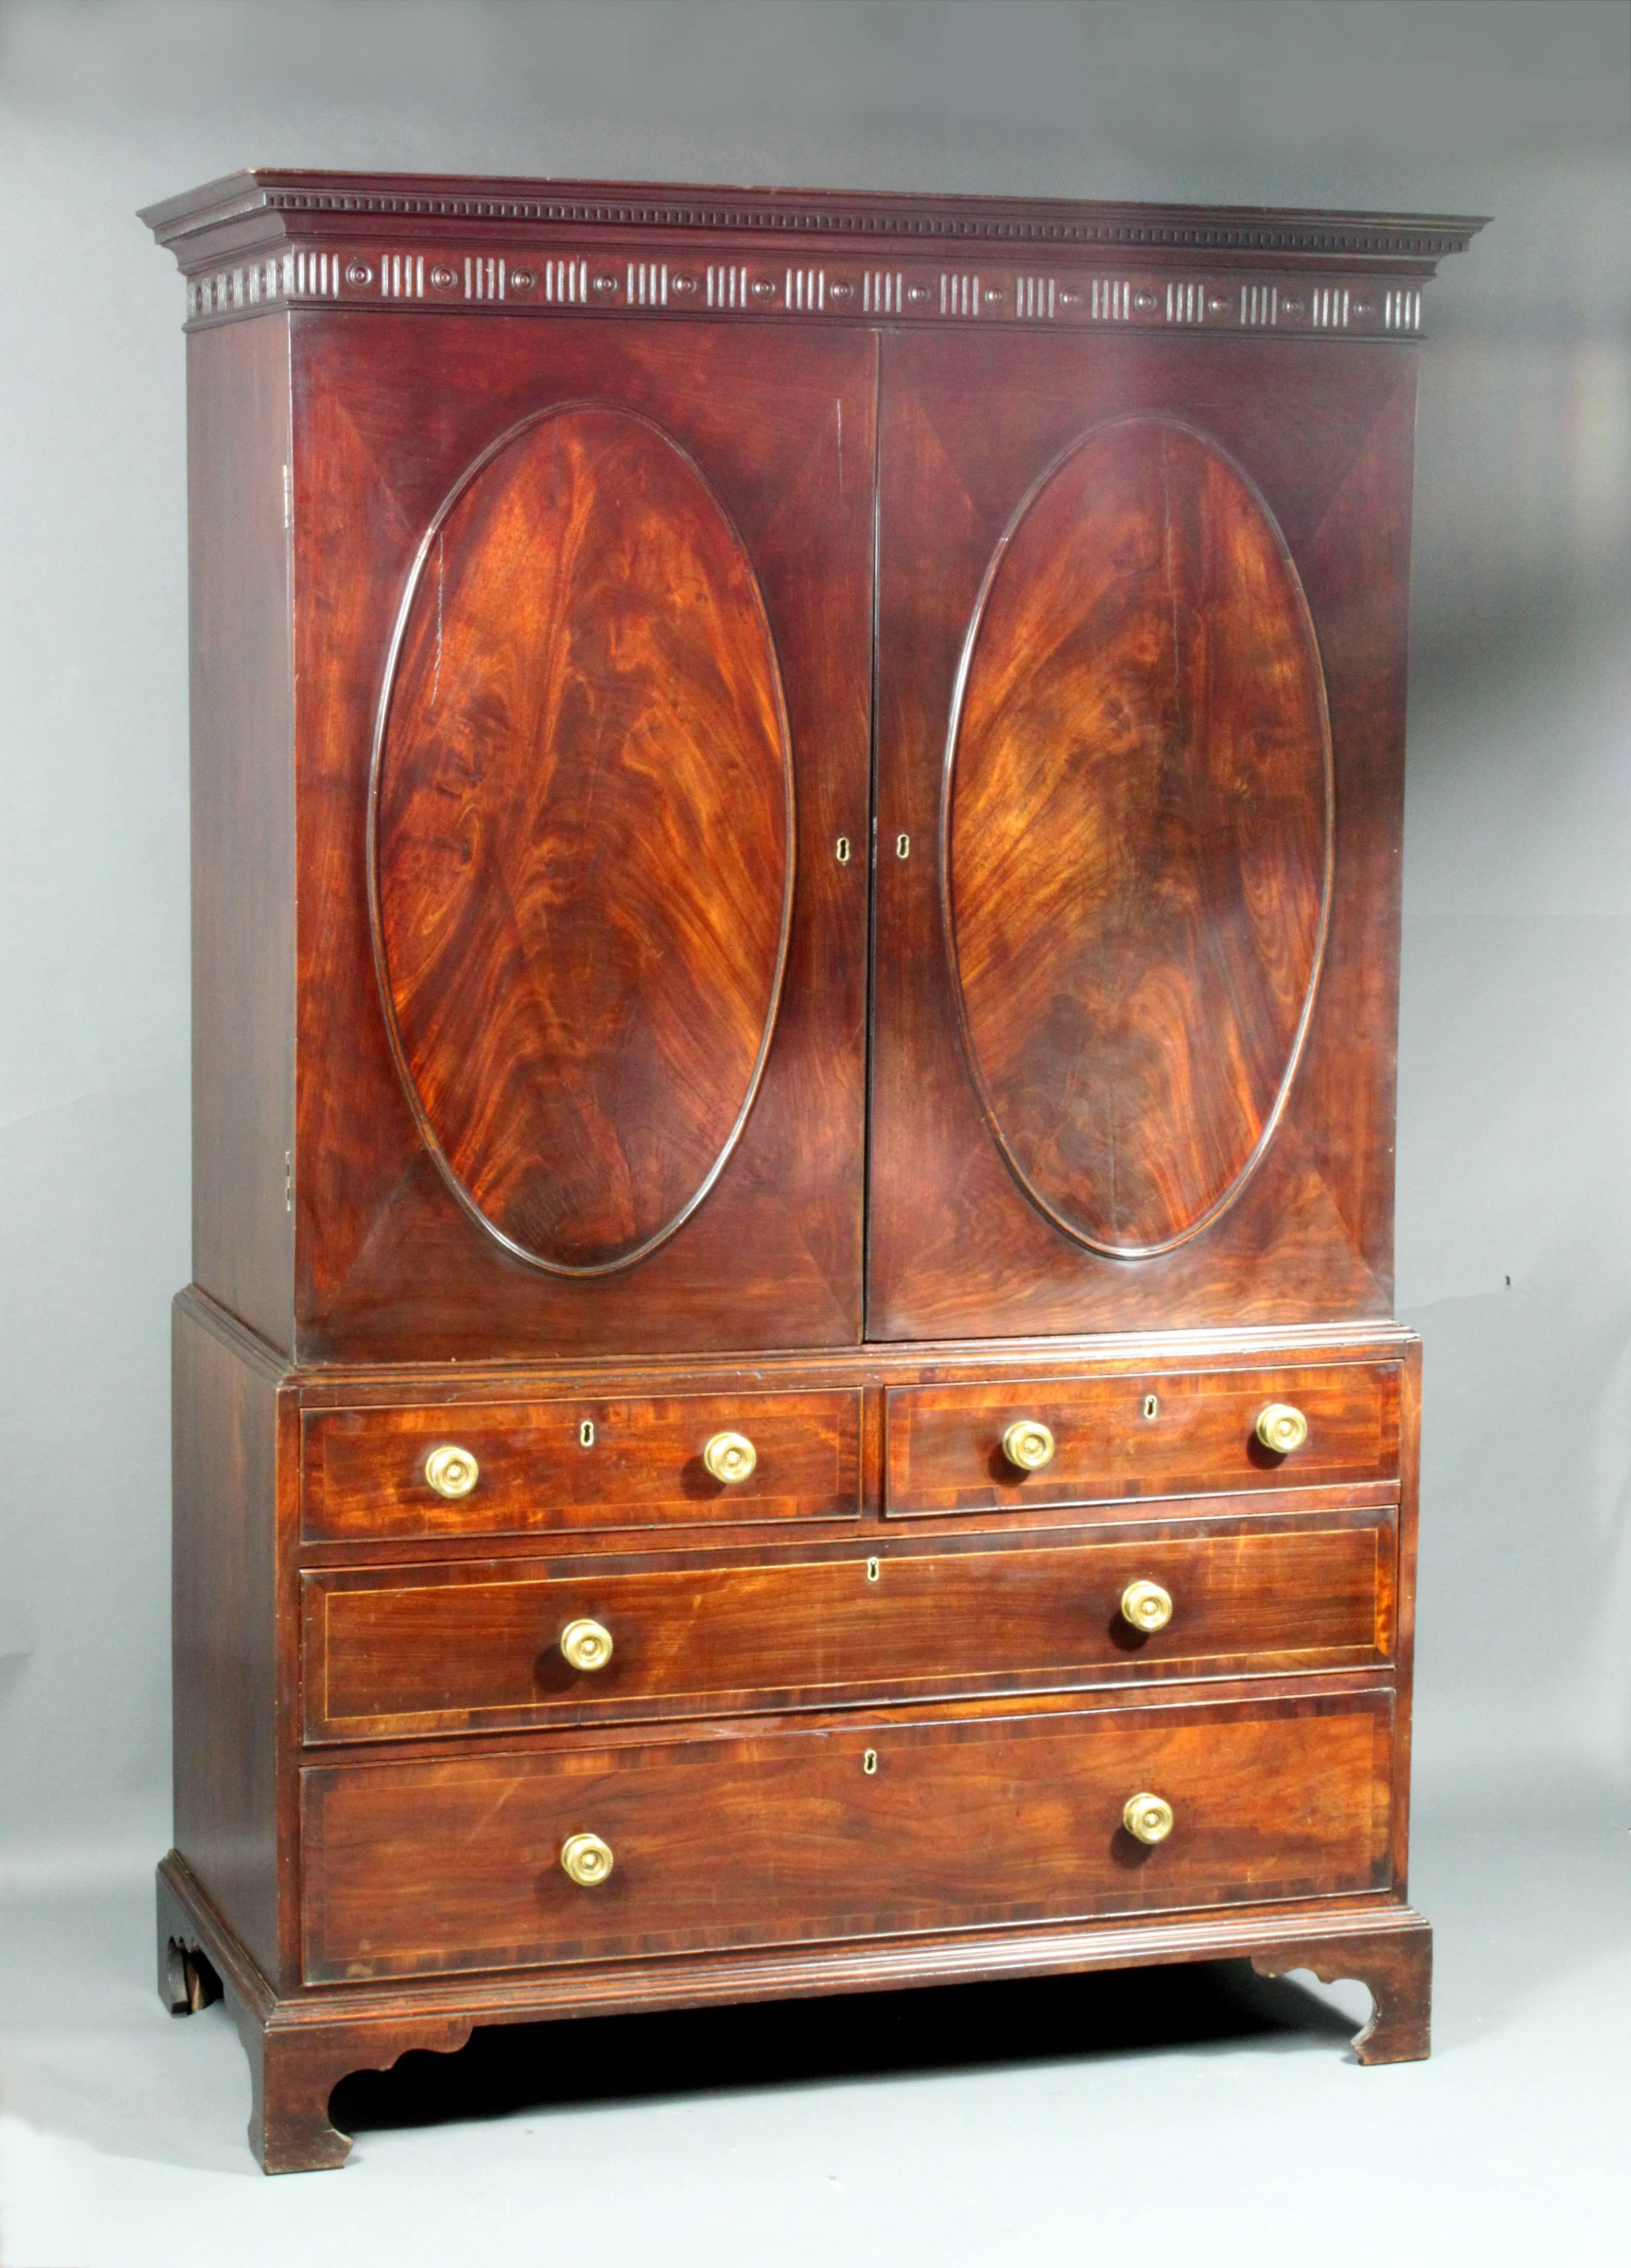 A fine George III Sheraton period oval panelled mahogany linen press of a good color and patina: The cupboard with three cedar lined slides and oak lined drawers below, fine carved dentil cornice. Replaced brasses.

Cornice measurements: 52 1/4